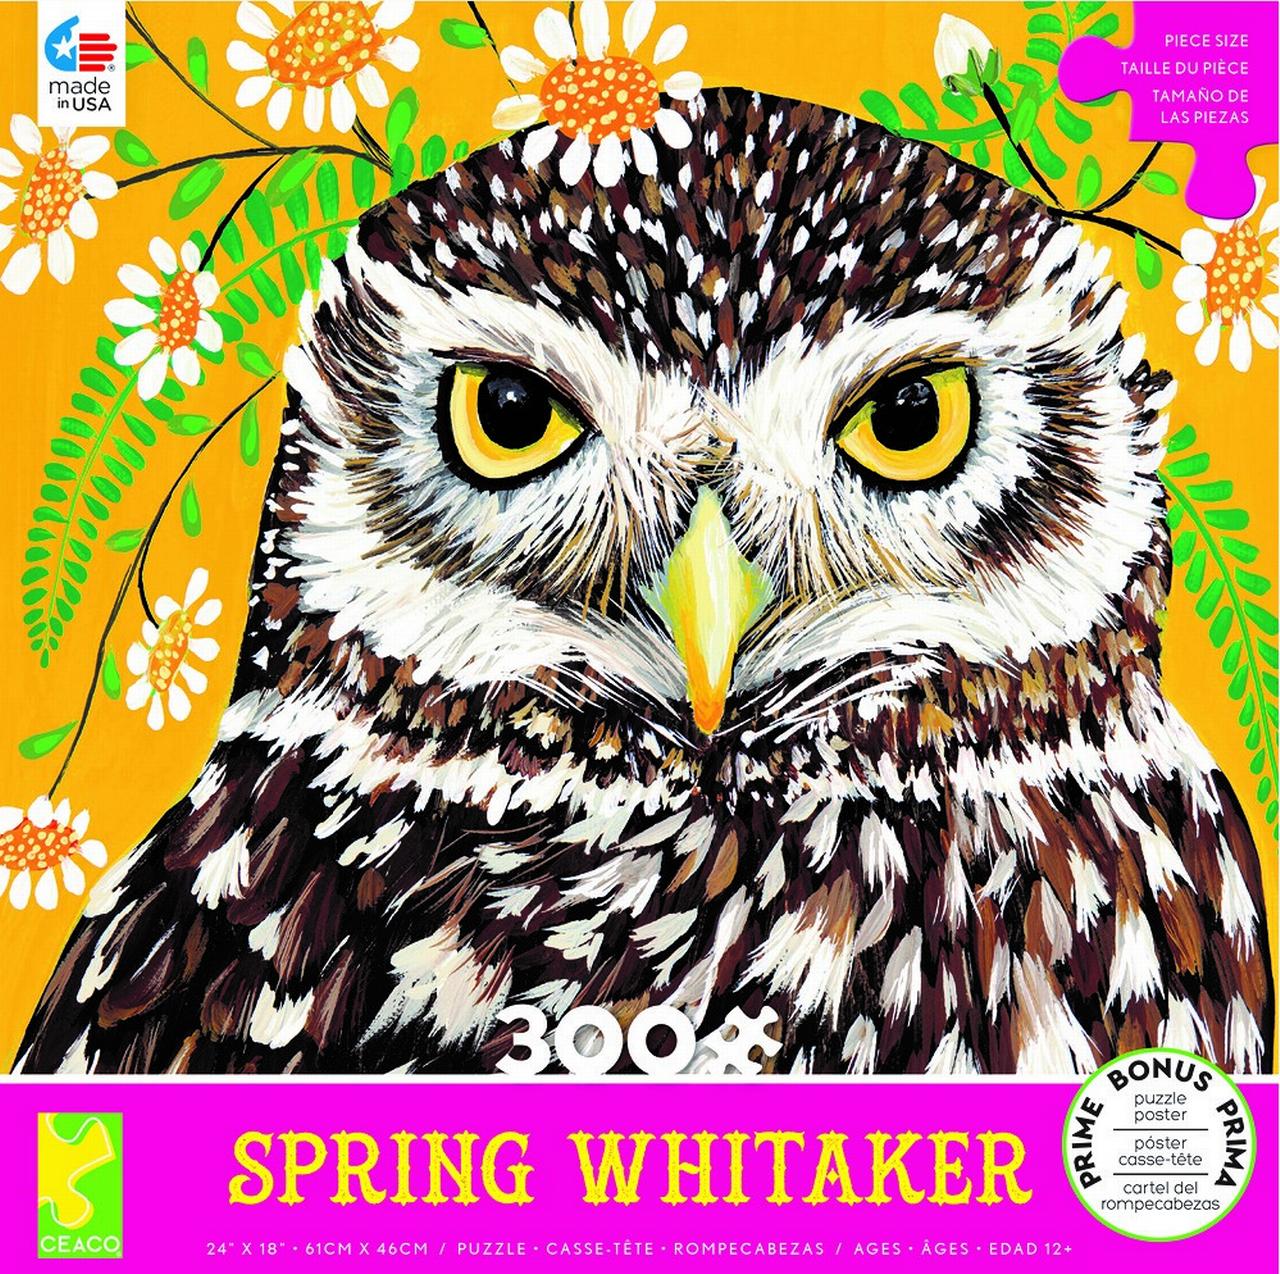 Ceaco - Spring Whitaker - Maureen - 300 piece Jigsaw Puzzle - image 1 of 2